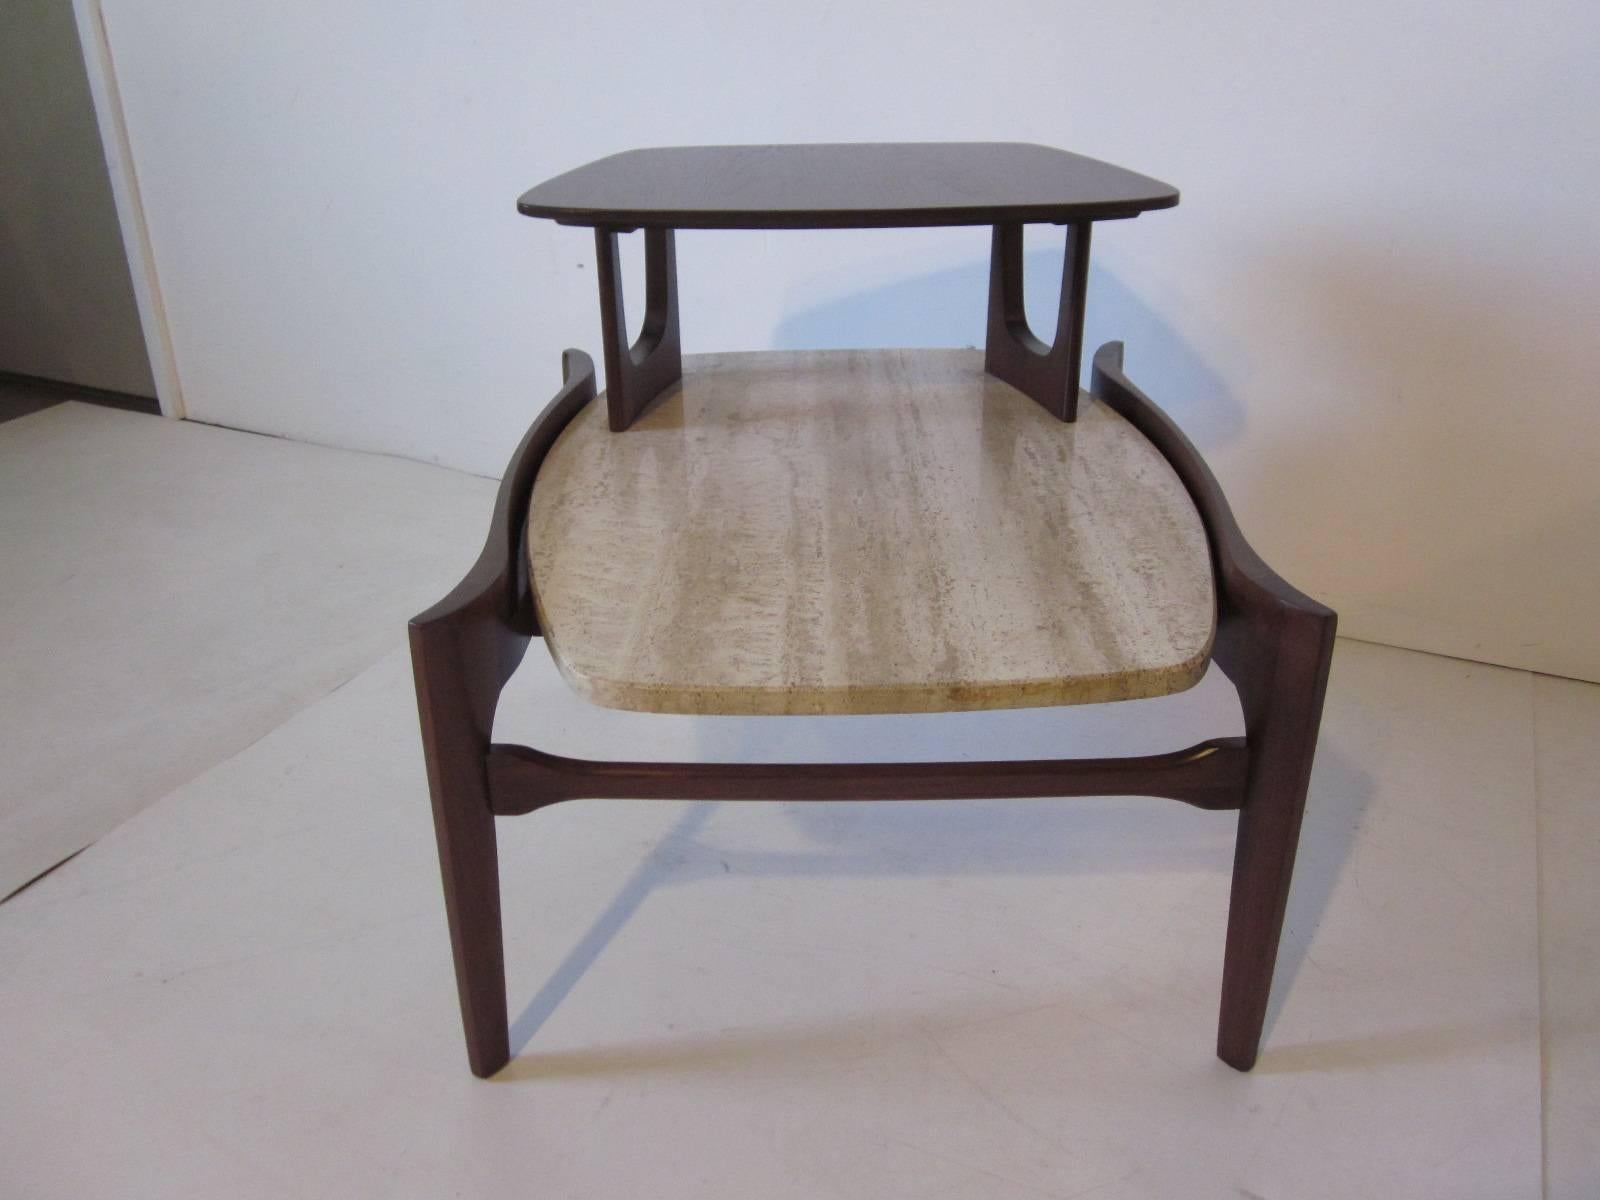 A dark walnut end / side table with wonderful Italian travertine marble top and sculptural designed frame designed for Gordon Furniture Company.